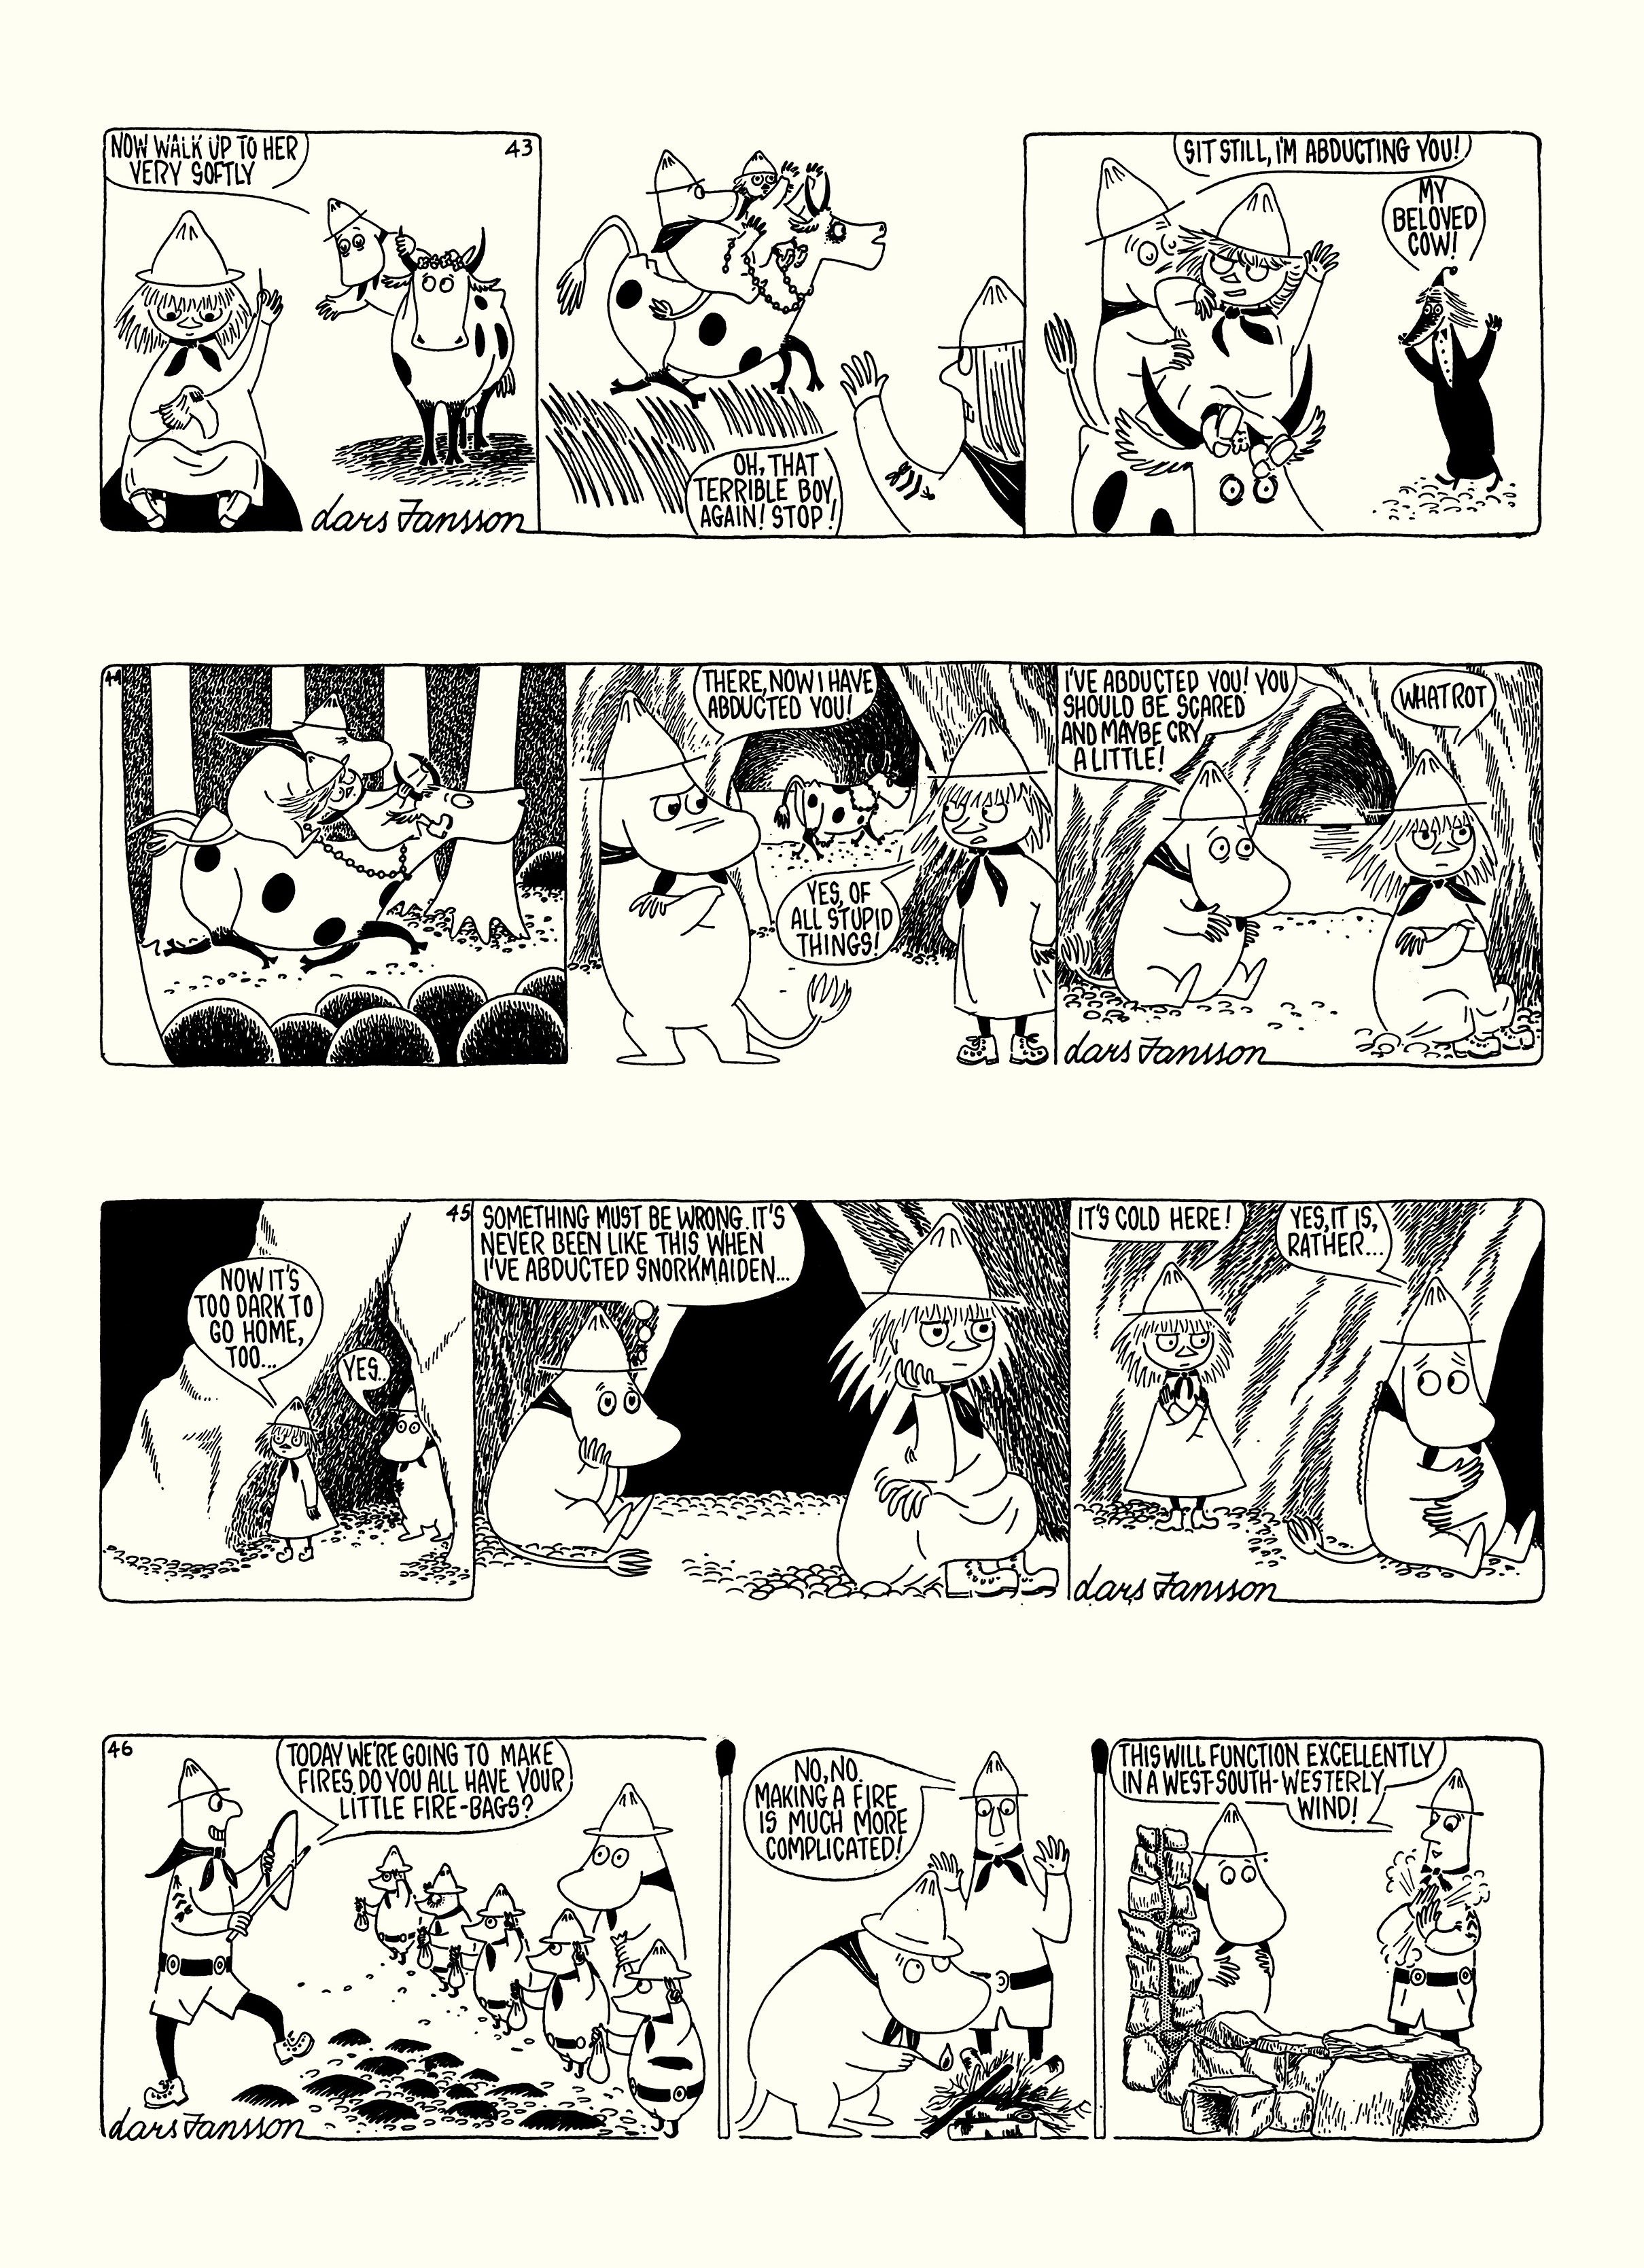 Read online Moomin: The Complete Lars Jansson Comic Strip comic -  Issue # TPB 7 - 38